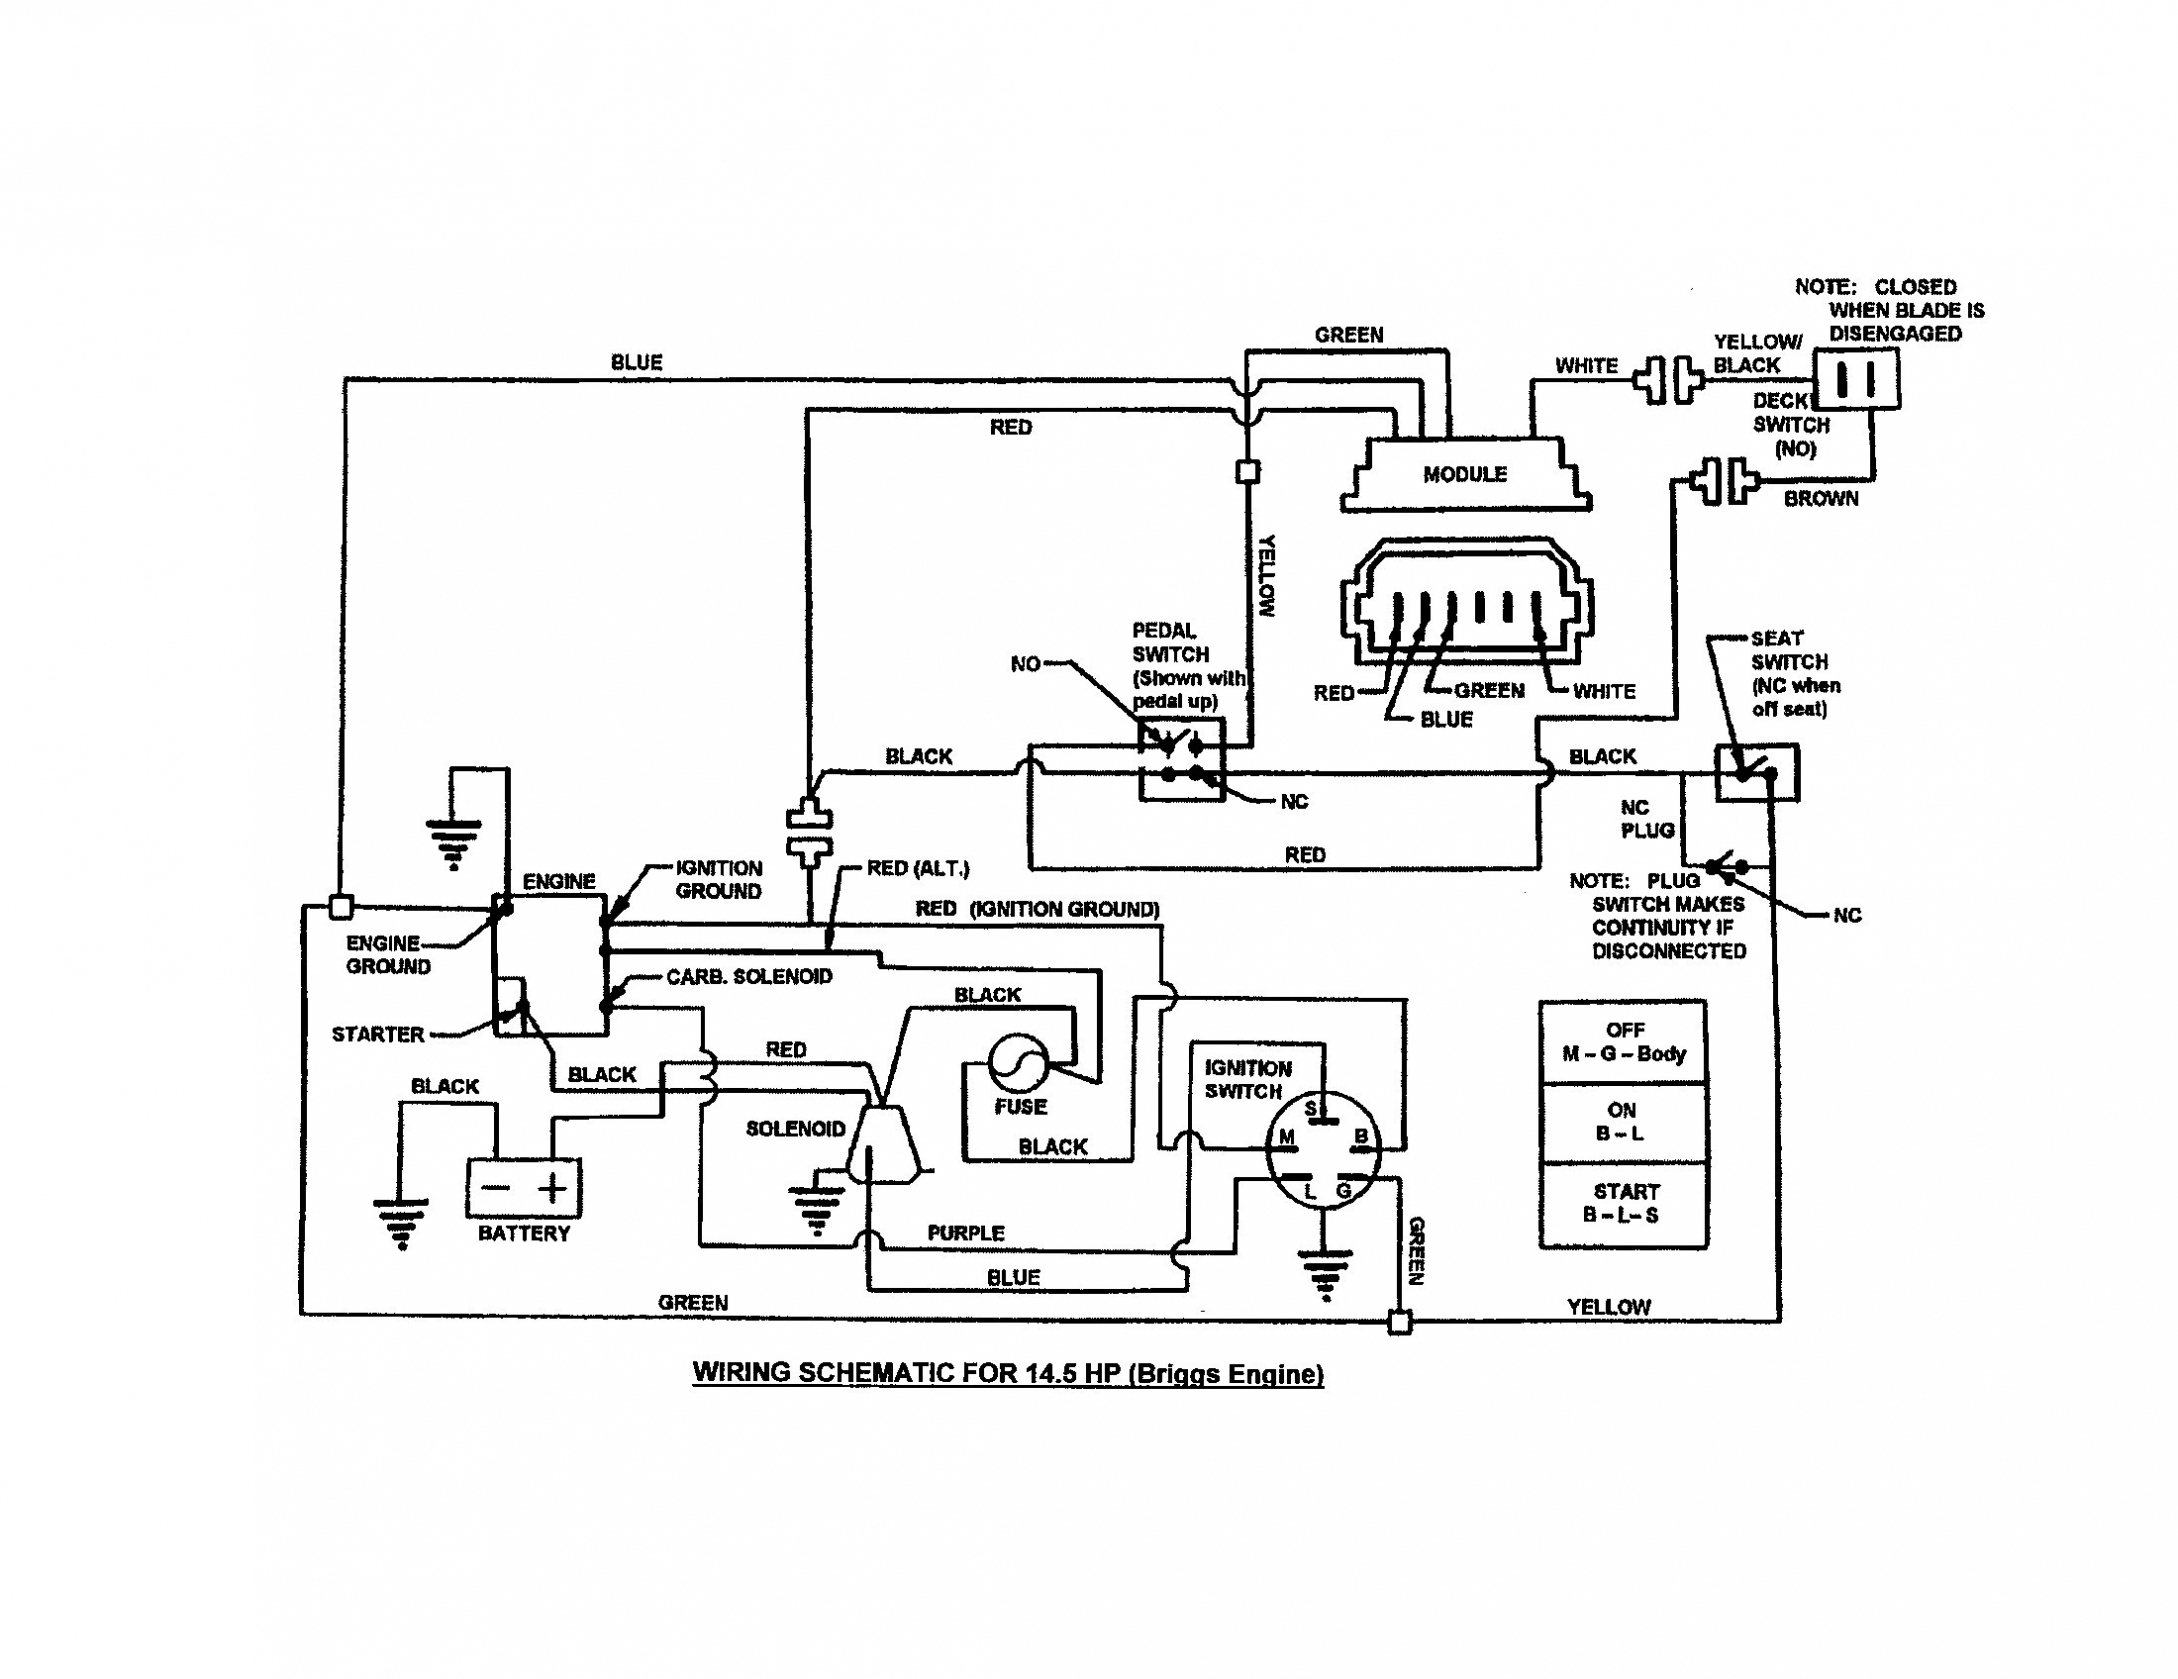 Wiring Diagram For Mtd Ignition Switch Best Wiring Diagram For – Mtd - Lawn Mower Ignition Switch Wiring Diagram